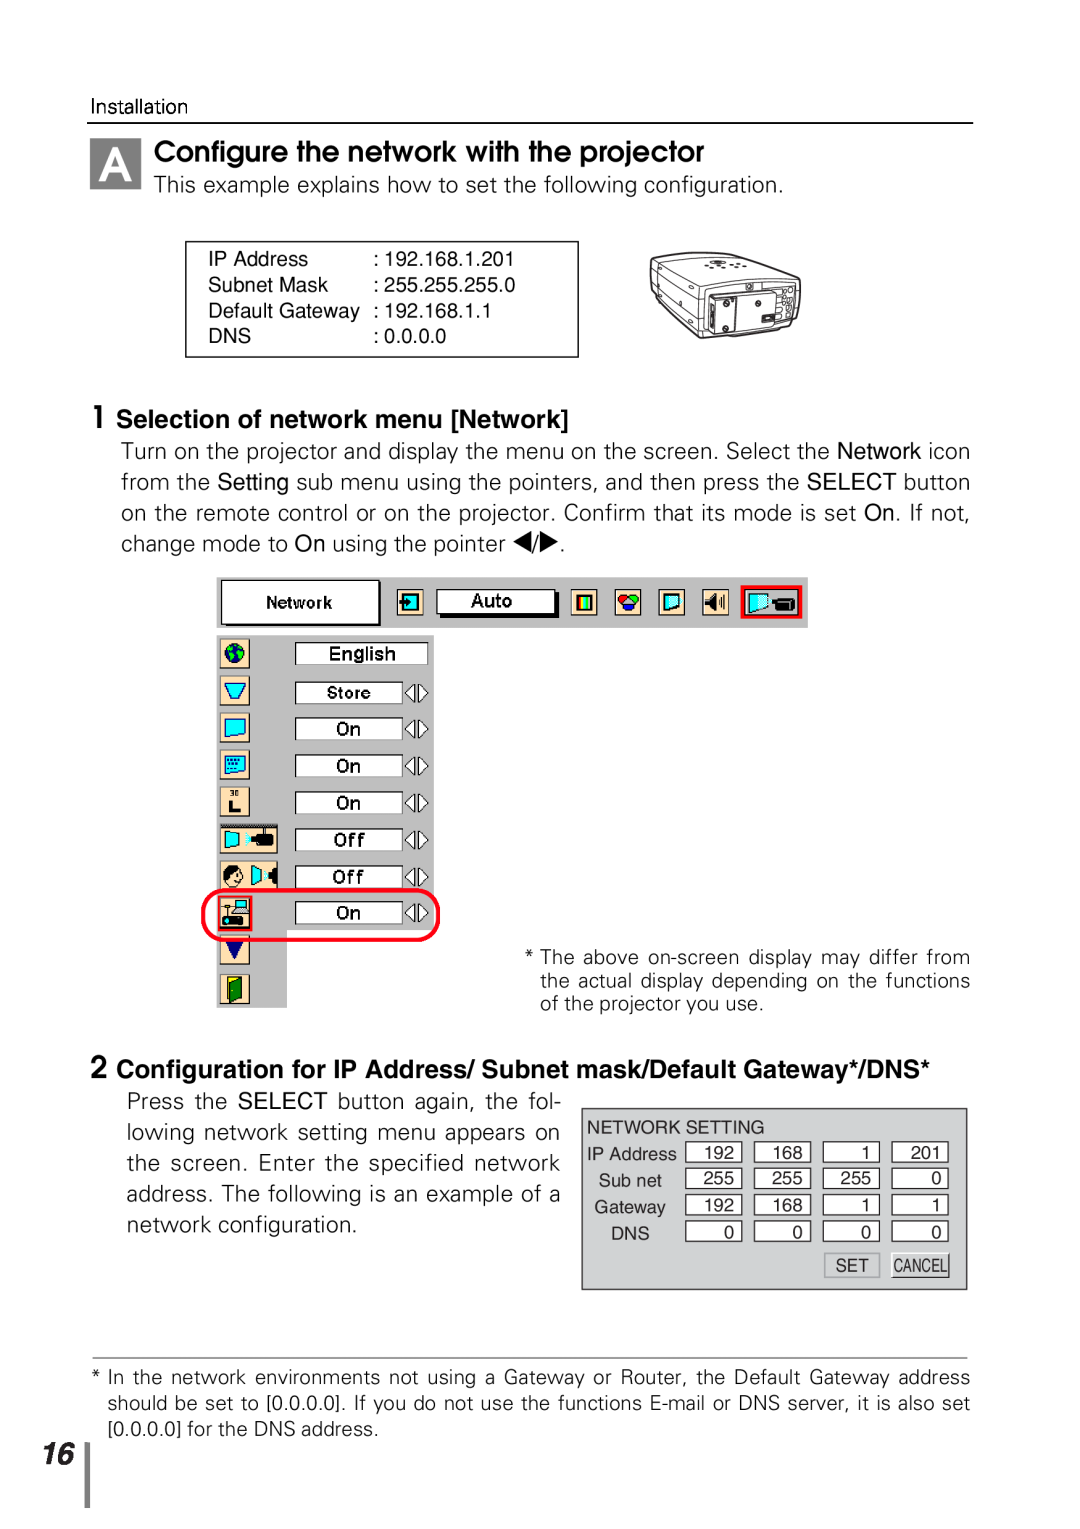 Sanyo POA-PN10 owner manual Configure the network with the projector, Selection of network menu Network 